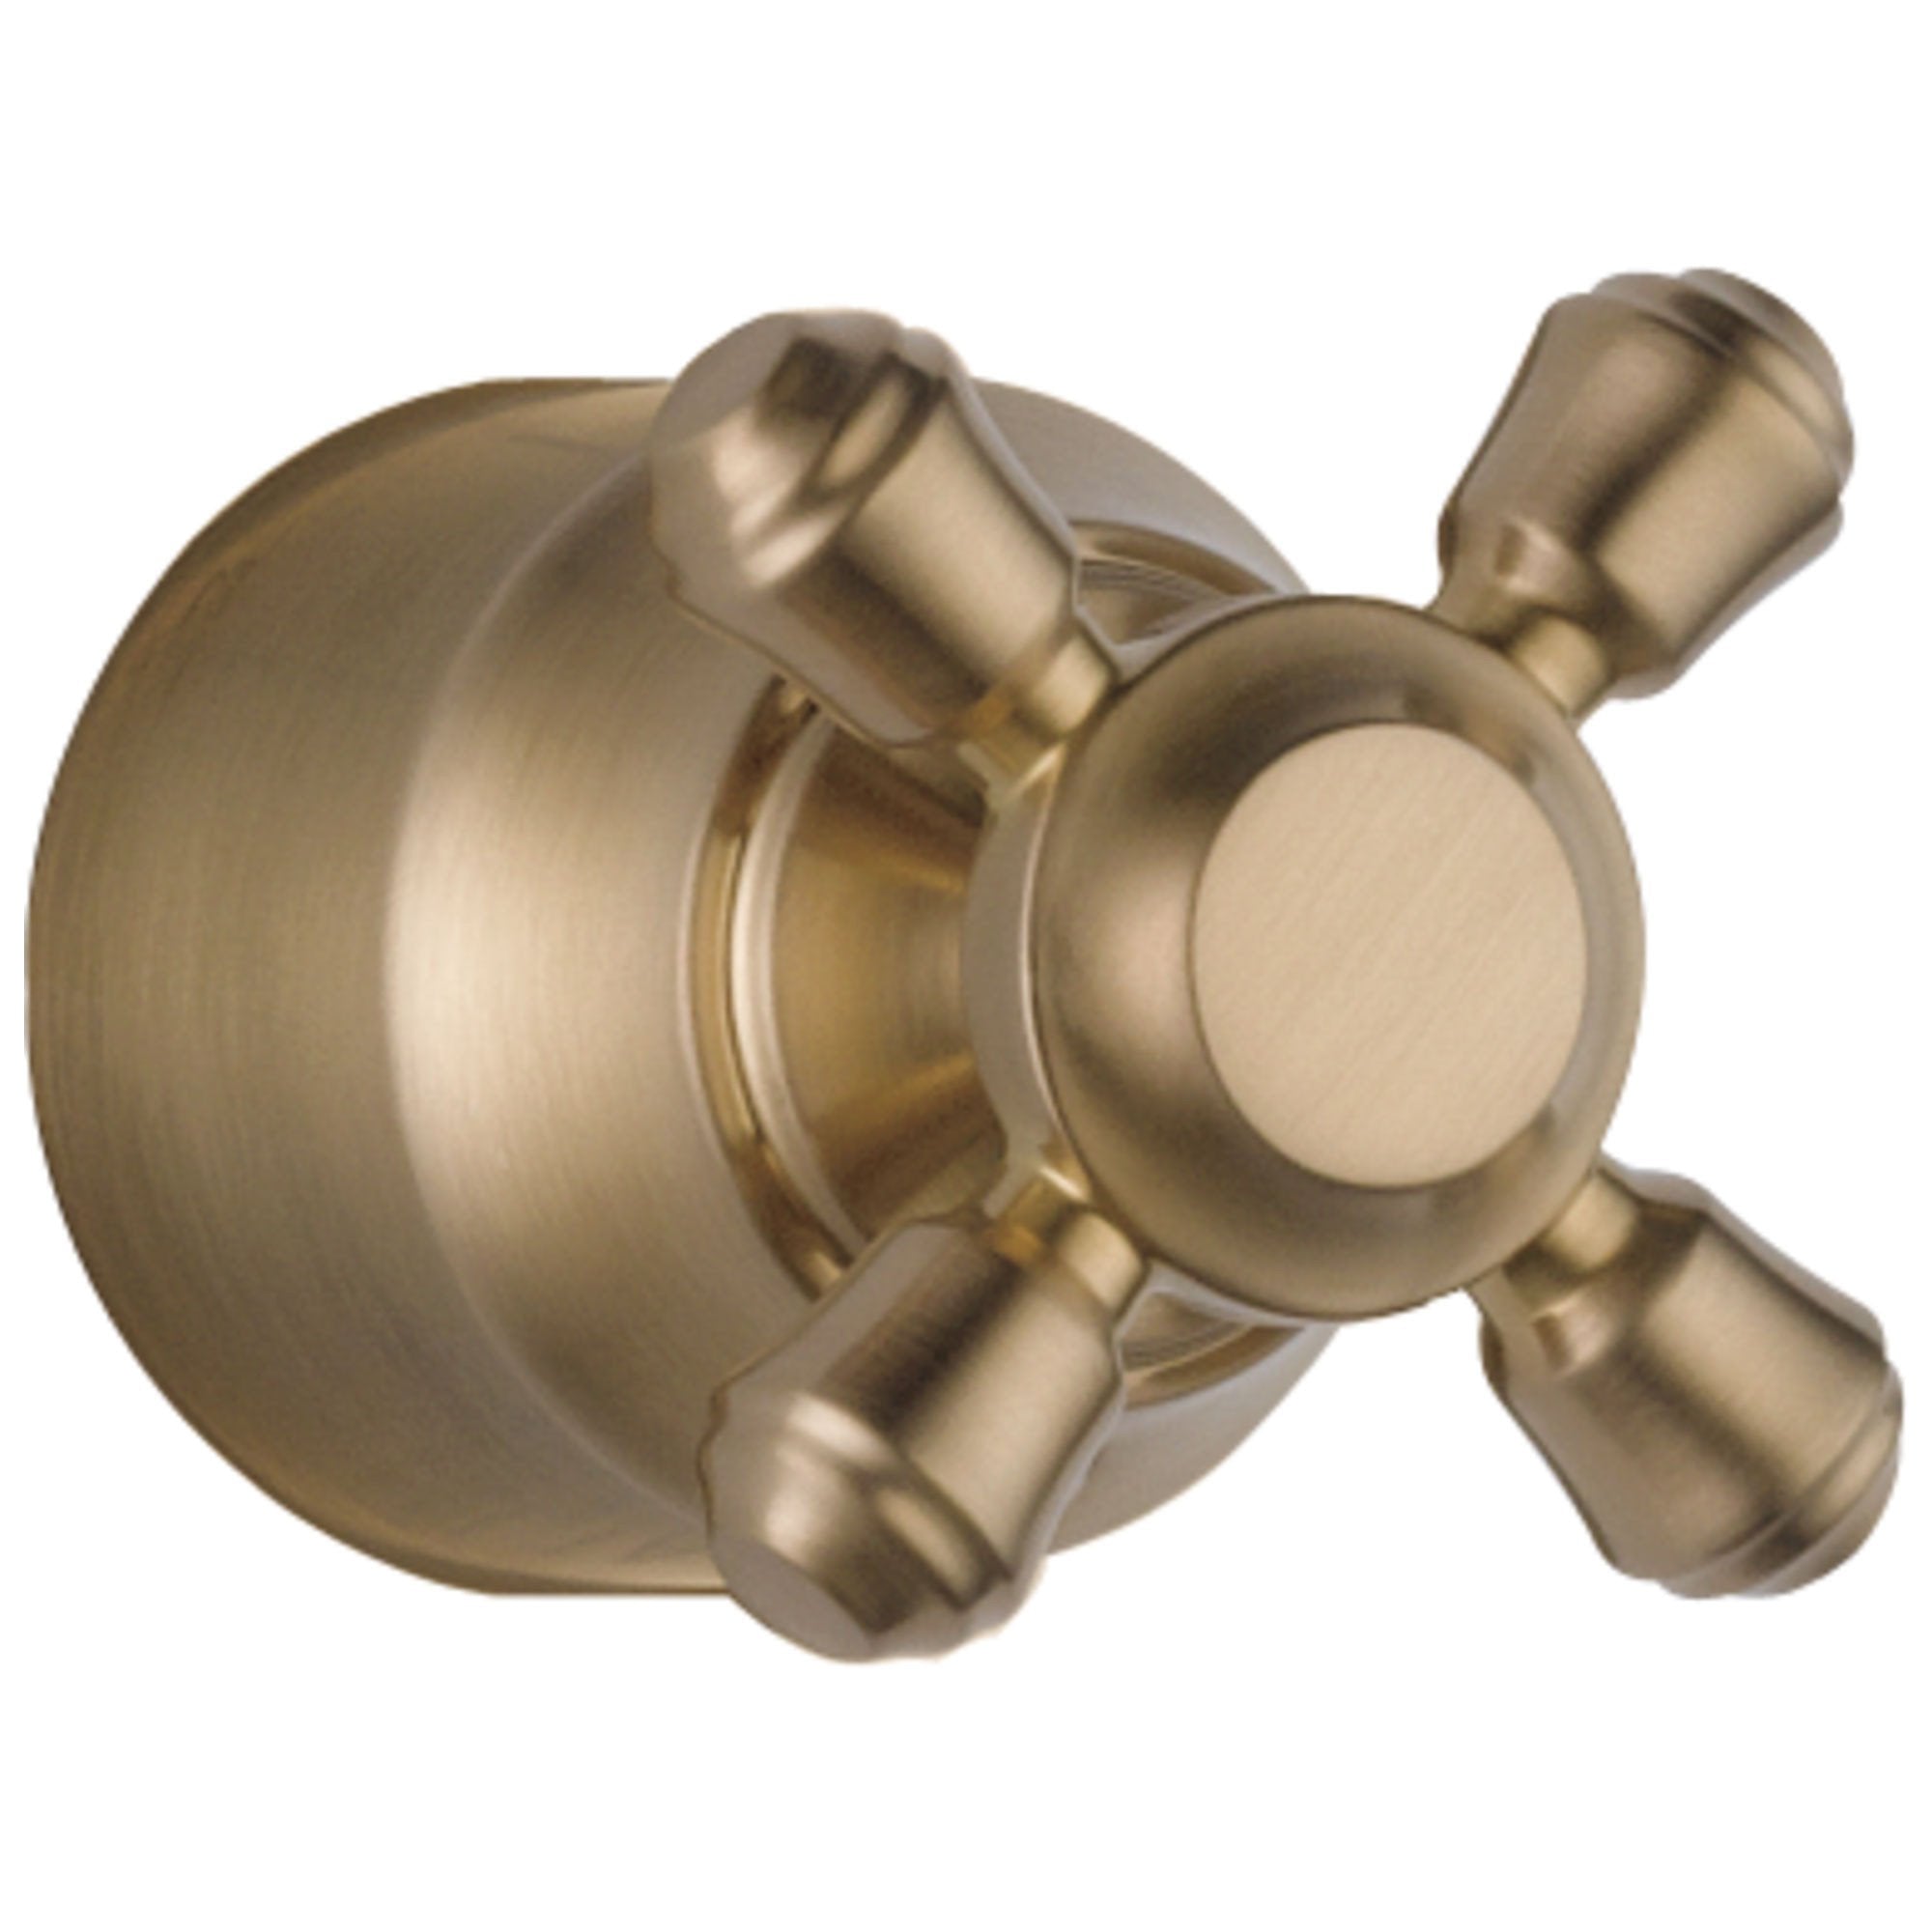 Delta Cassidy Collection Champagne Bronze Finish Diverter / Transfer Valve Cross Handle - Quantity 1 Included DH595CZ